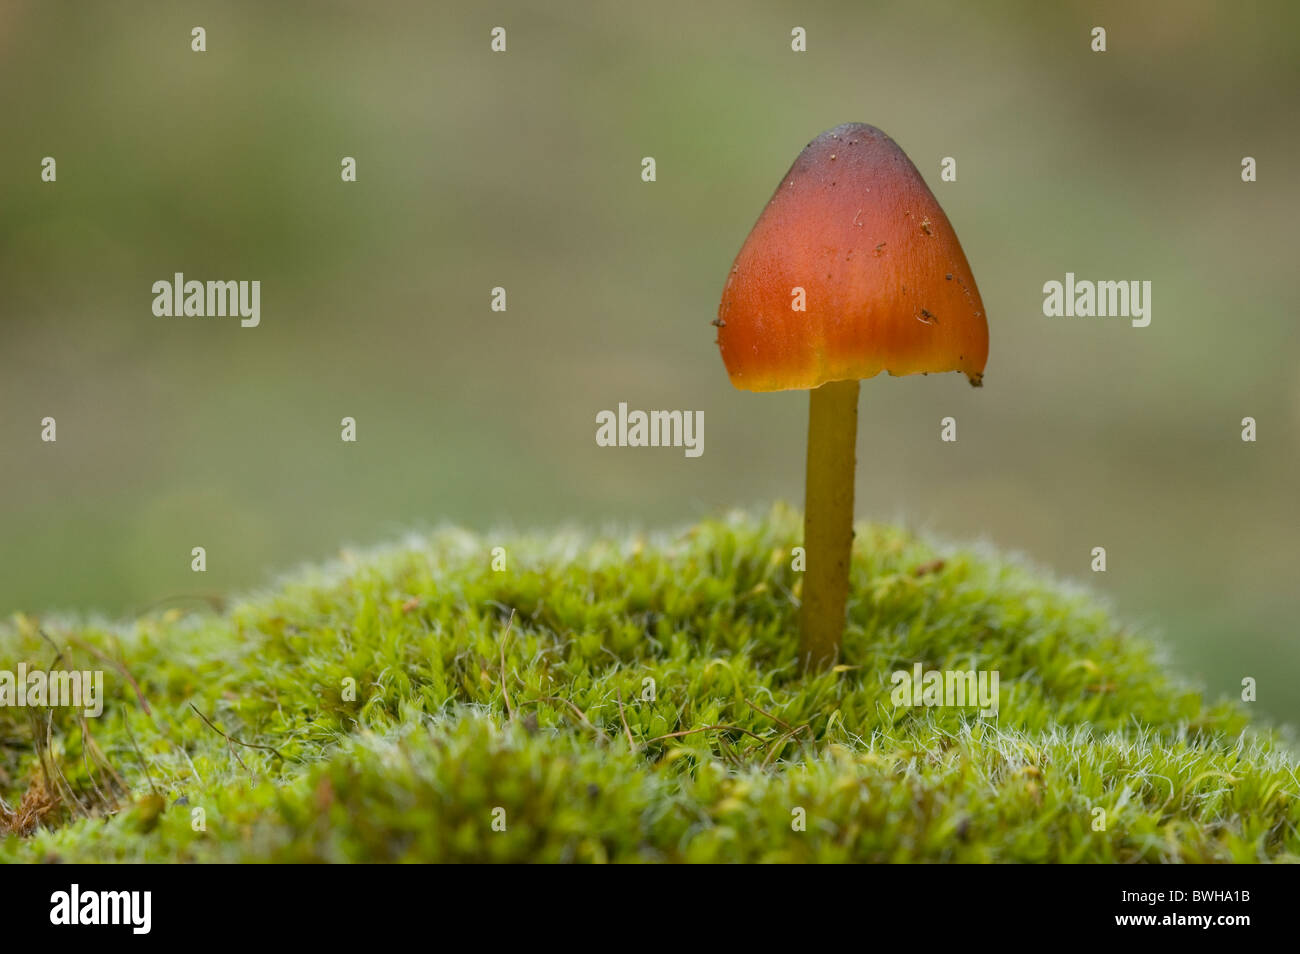 Witch's hat, Conical wax cap or Conical slimy cap (Hygrocybe conica) Stock Photo